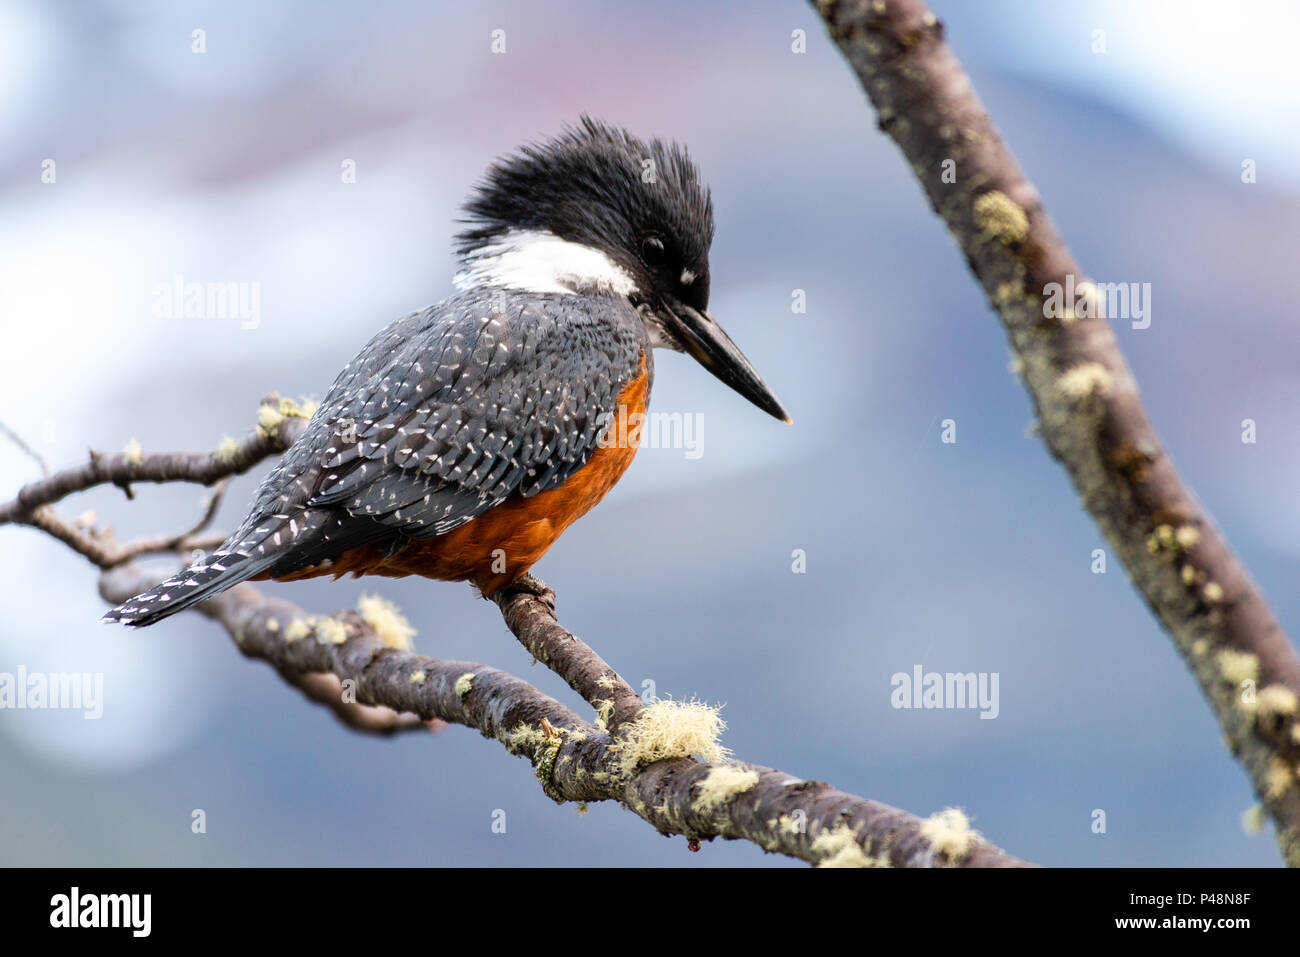 The ringed kingfisher (Megaceryle torquata) is a large, conspicuous and noisy kingfisher commonly found along the lower Rio Grande valley in southeast Stock Photo